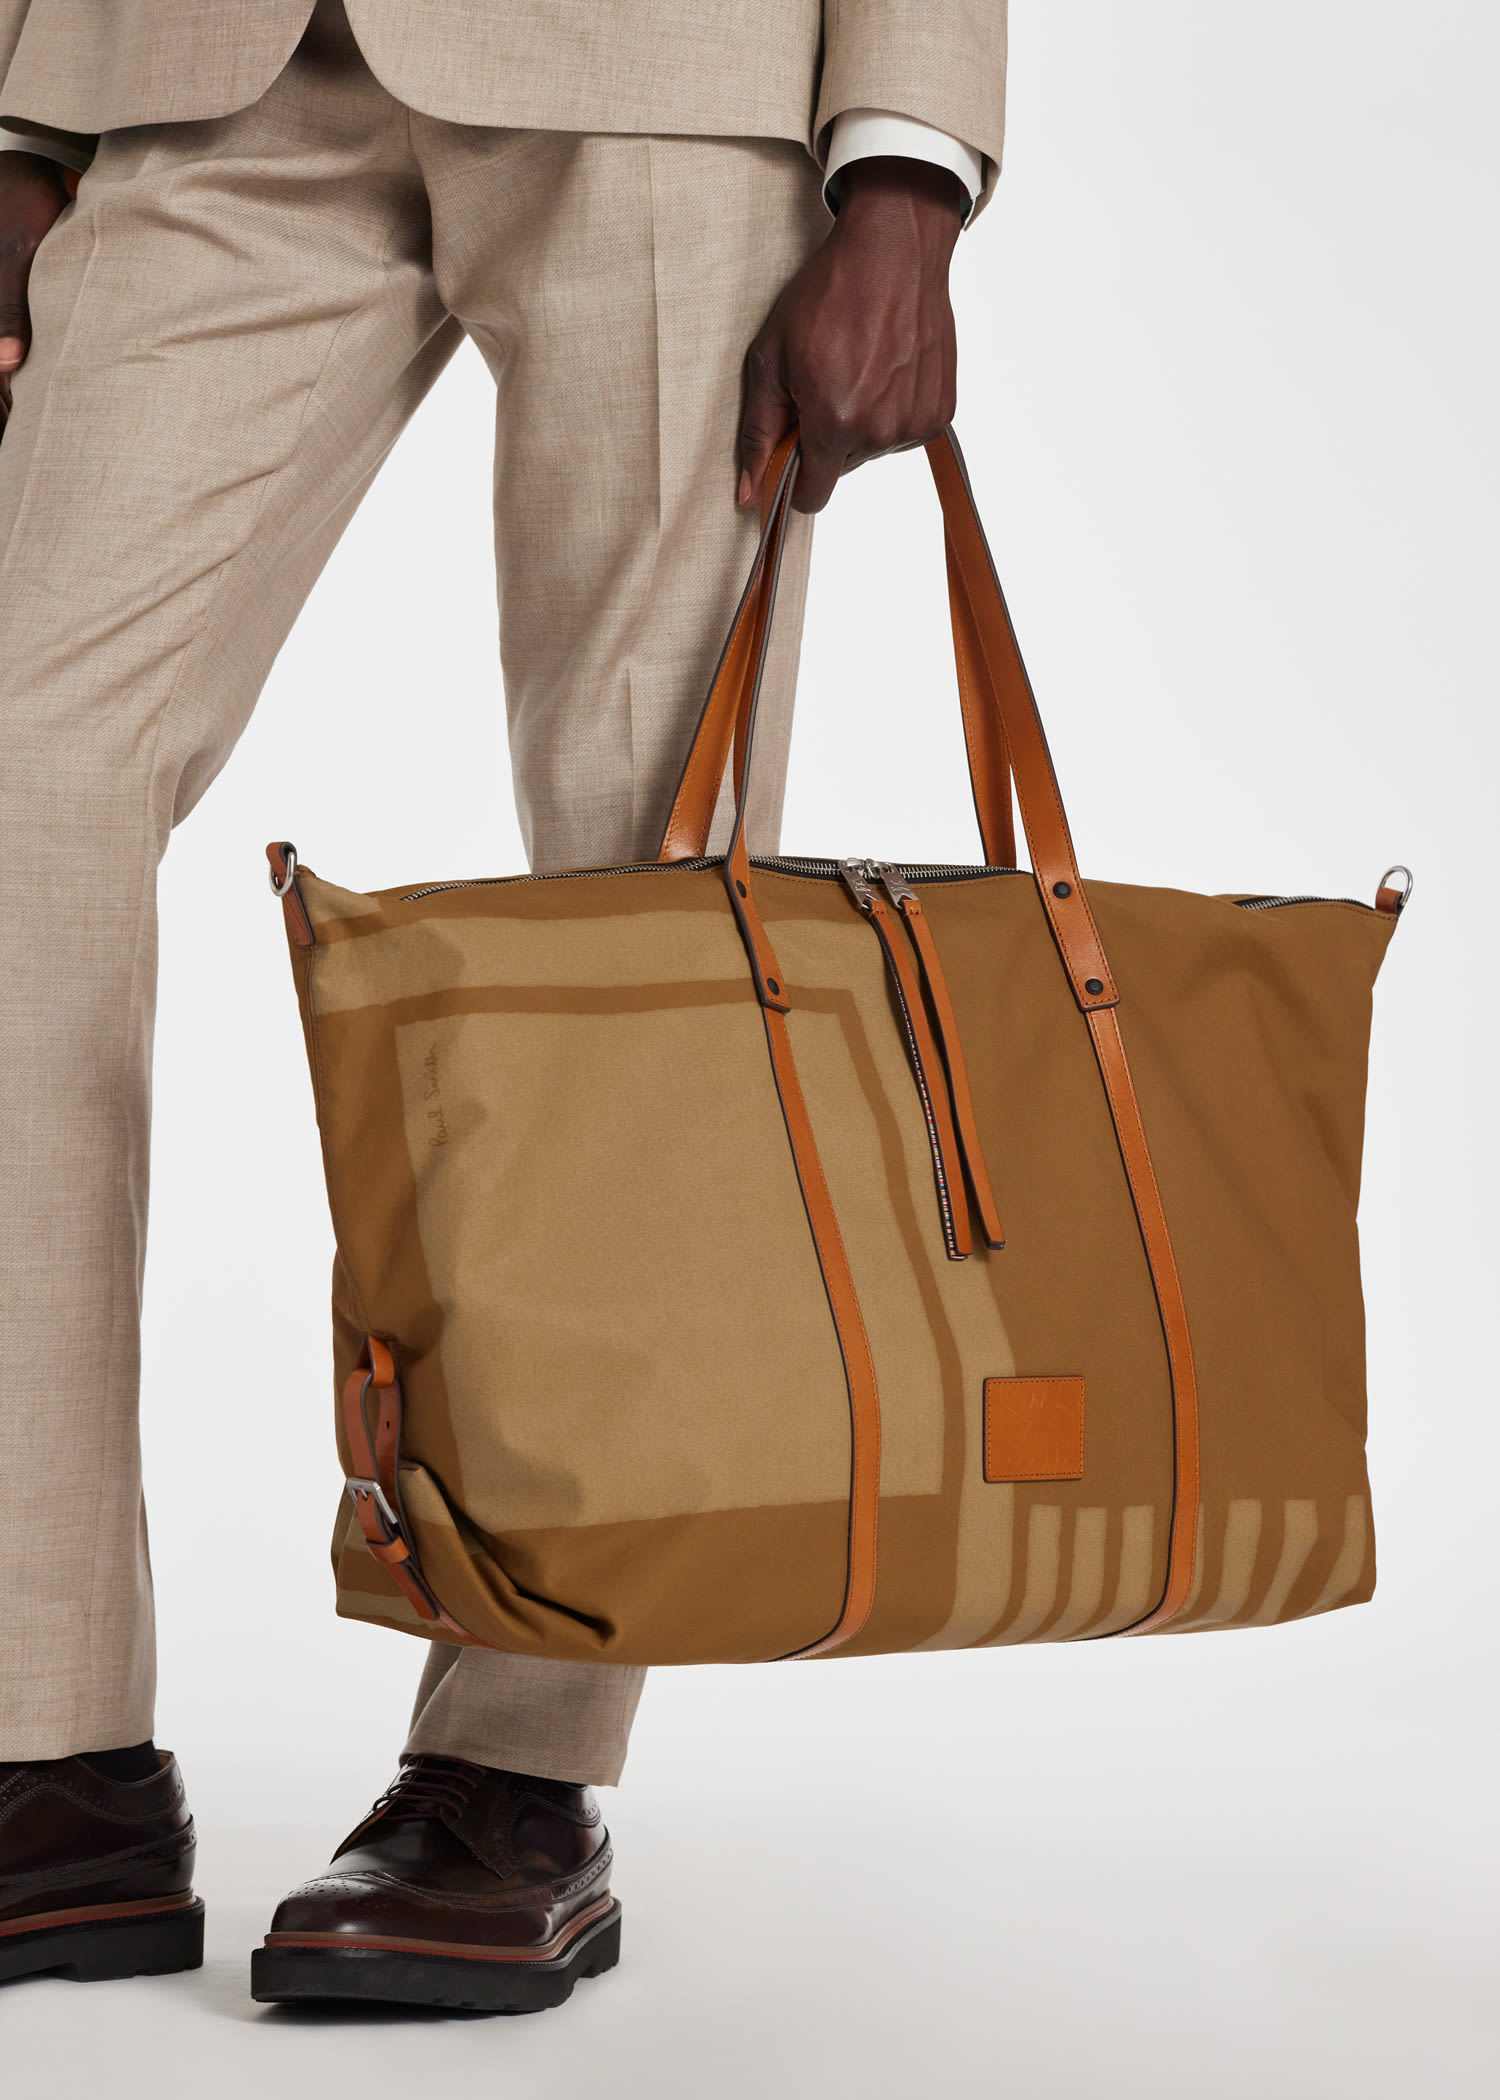 Paul Smith Tan Holdall Bag in Brown for Men